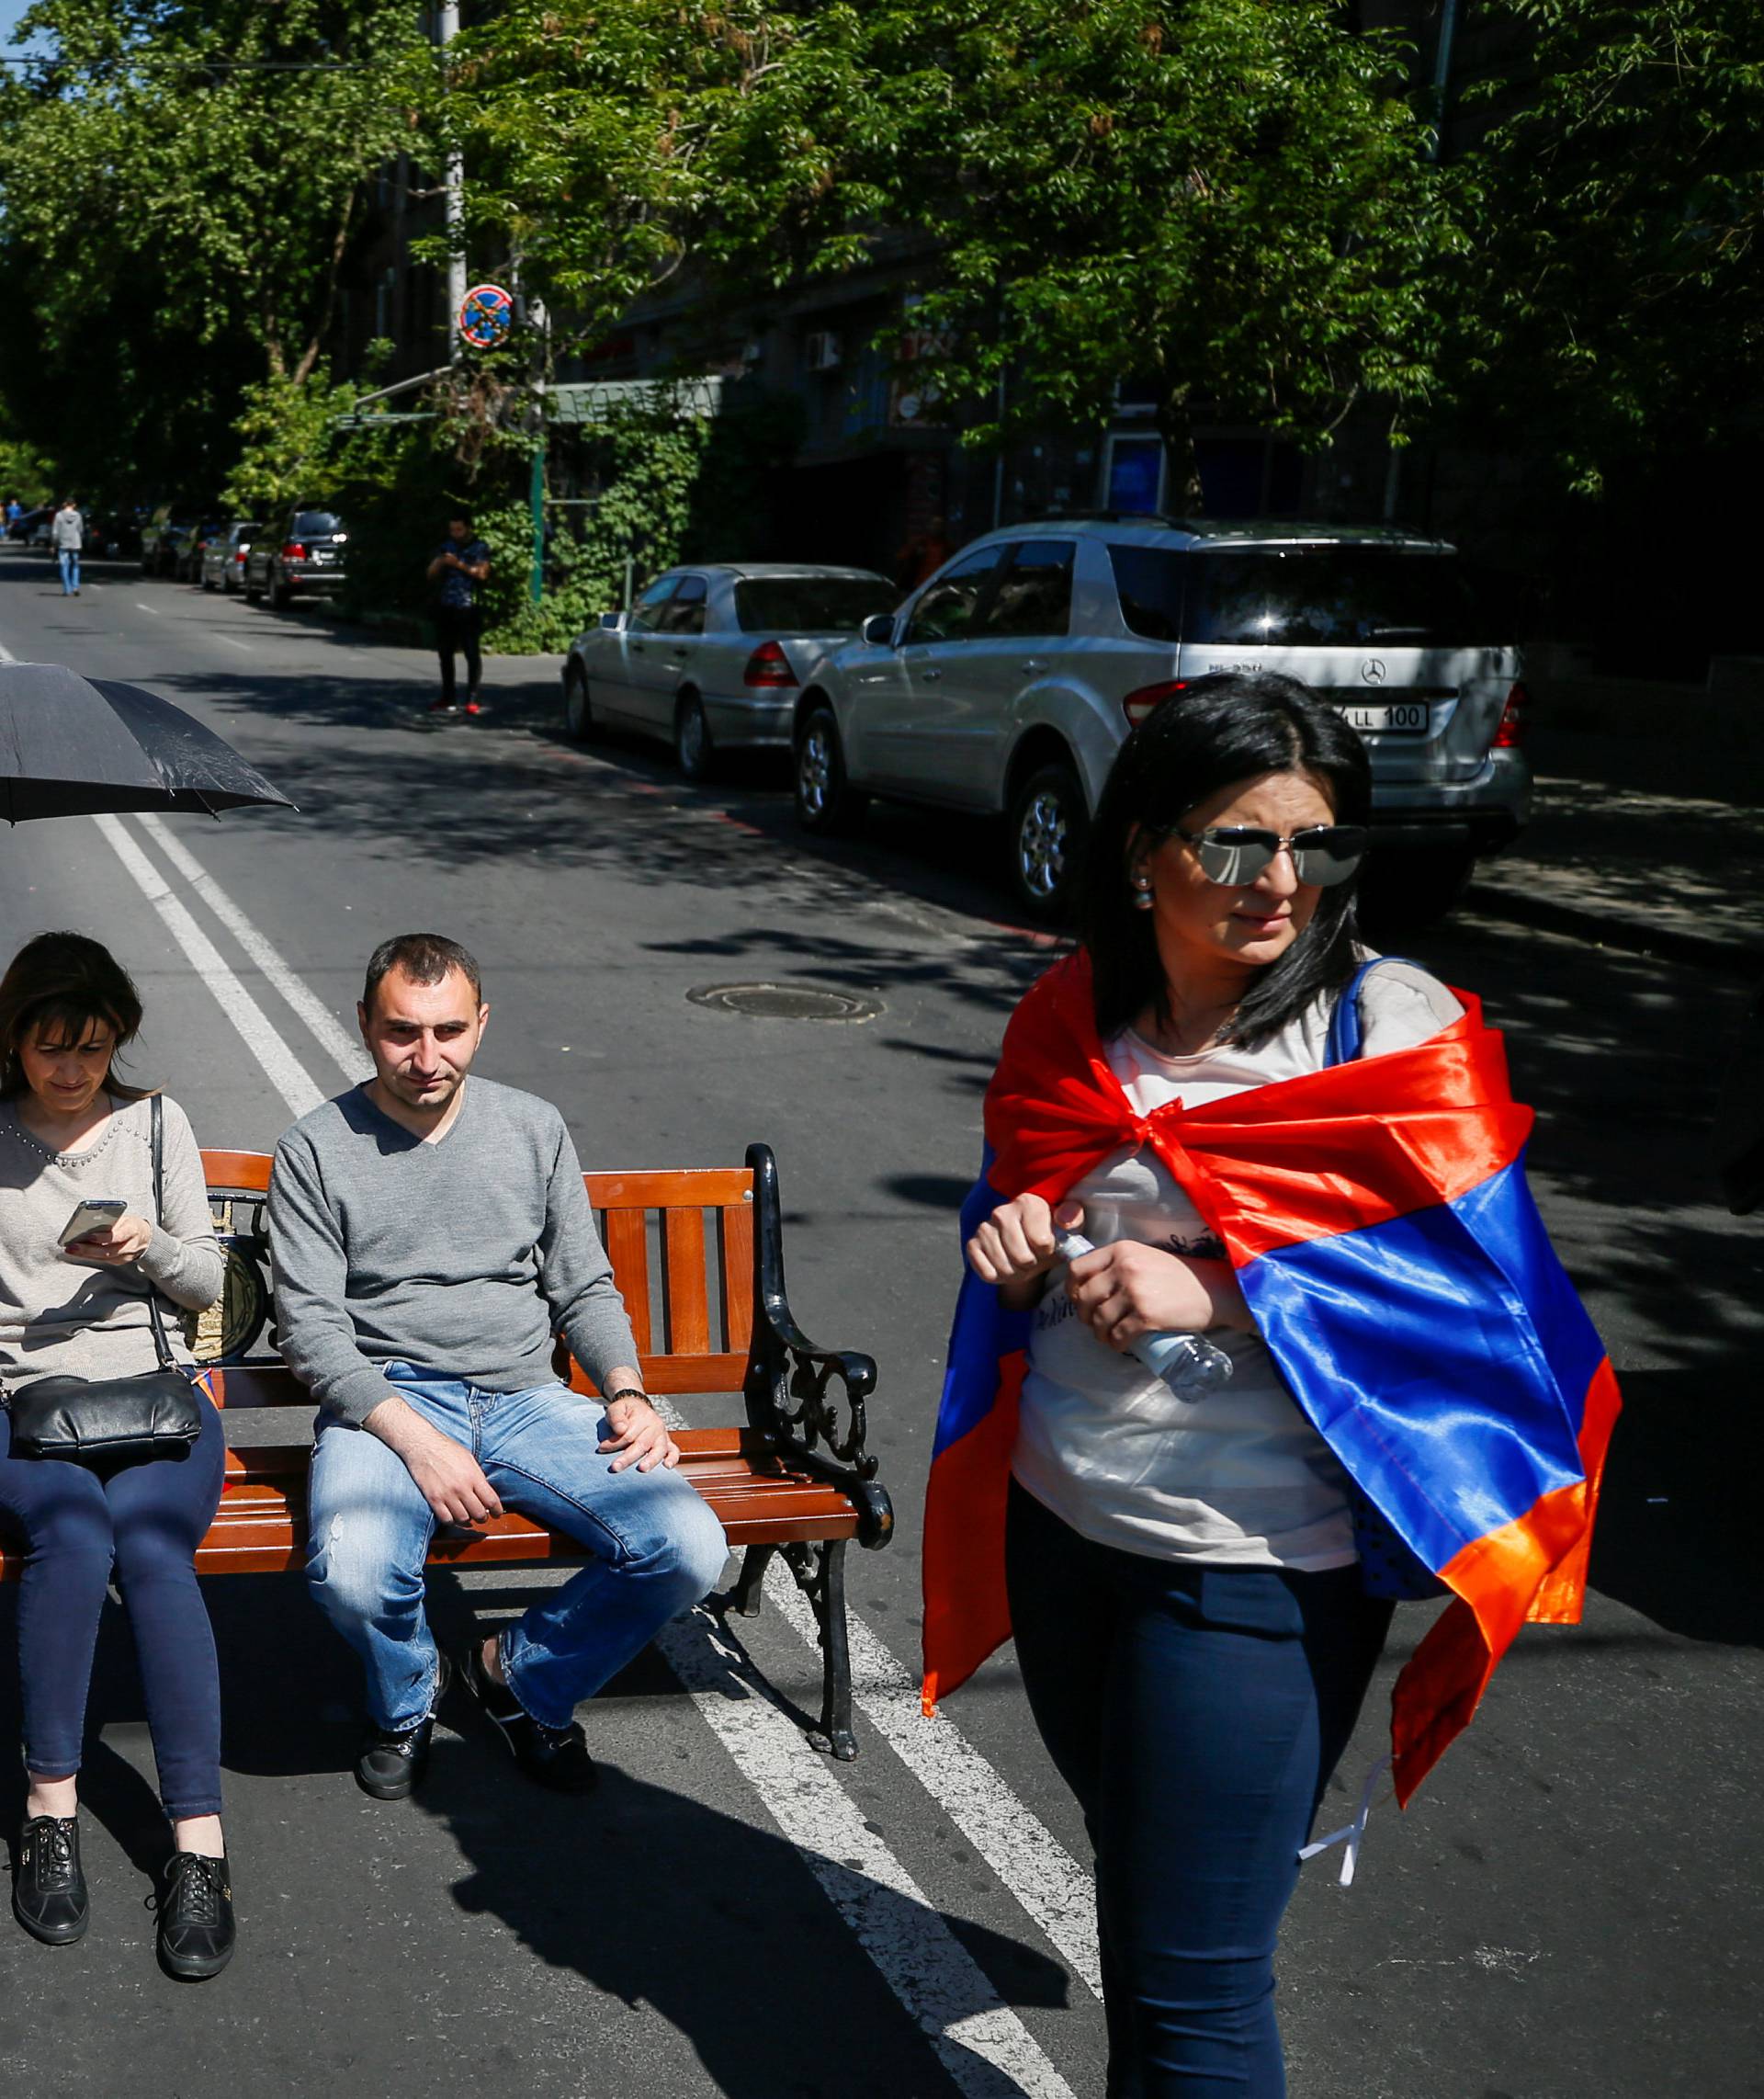 Armenian opposition supporters sit on bench as they block a road after protest movement leader Nikol Pashinyan announced a nationwide campaign of civil disobedience in Yerevan